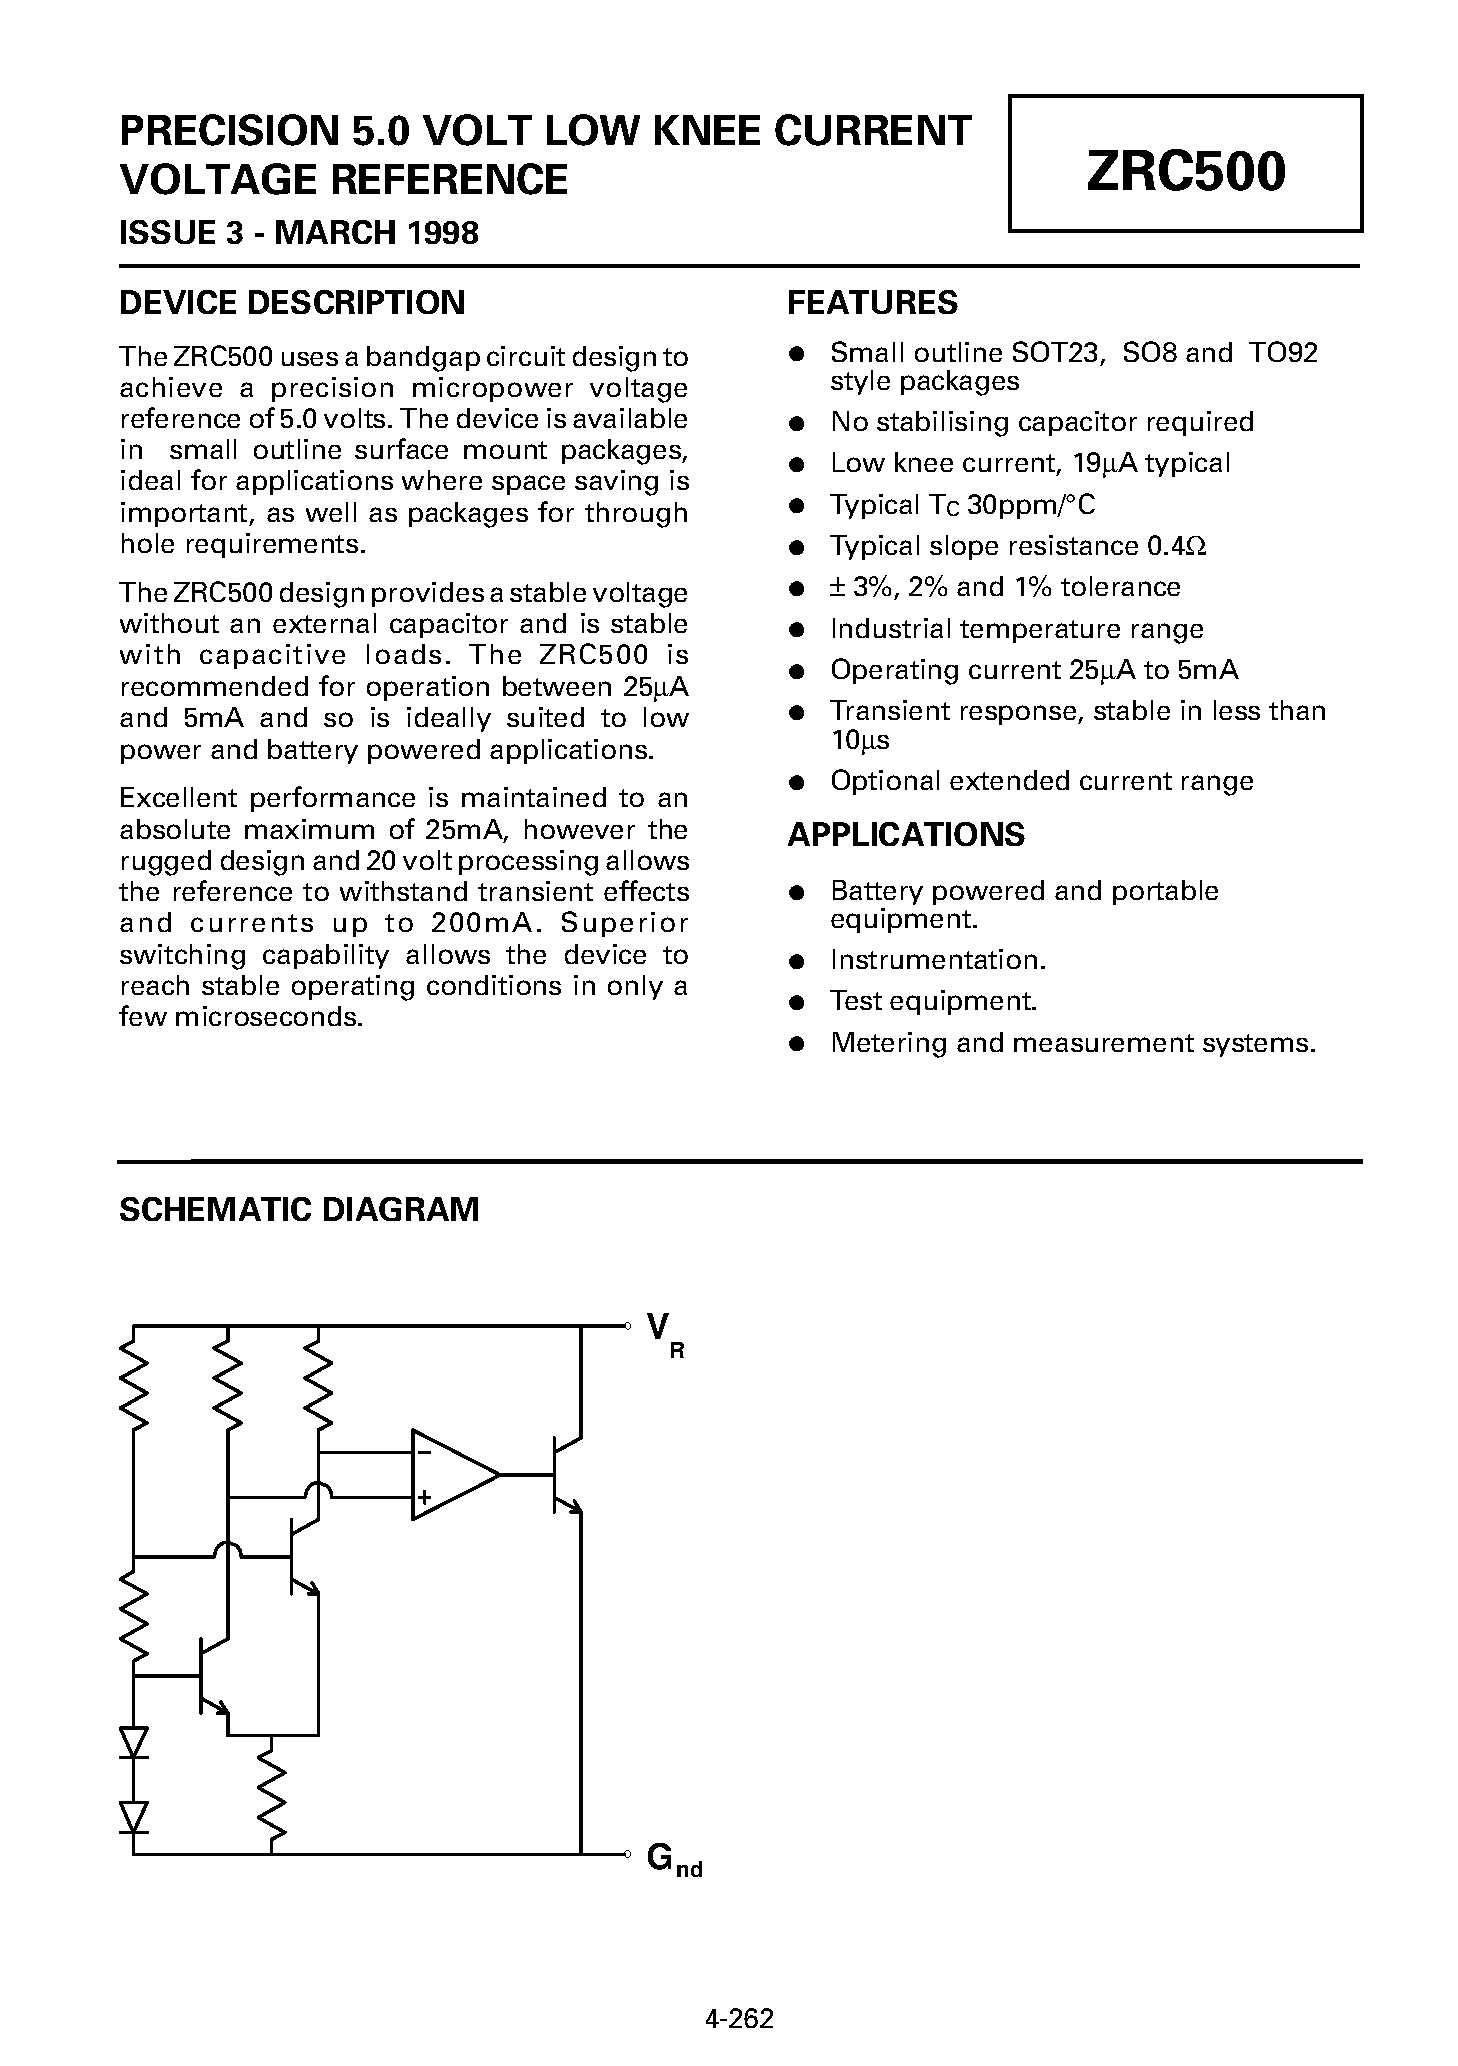 Datasheet ZRC500R03 - PRECISION 5.0 VOLT LOW KNEE CURRENT VOLTAGE REFERENCE page 1